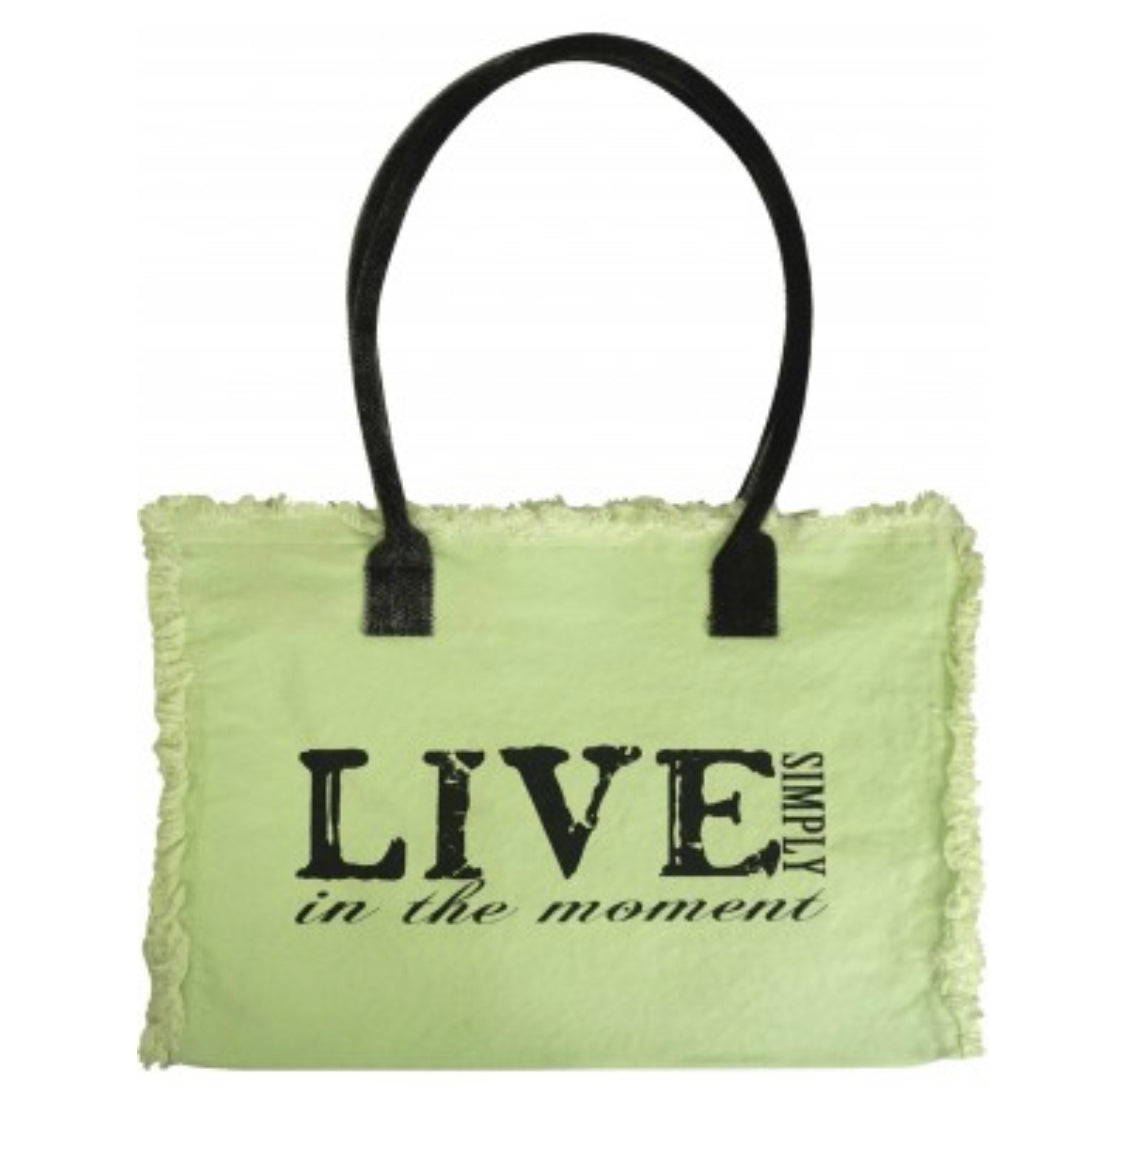 Vintage Addiction Leather Tote Bags for Women for sale